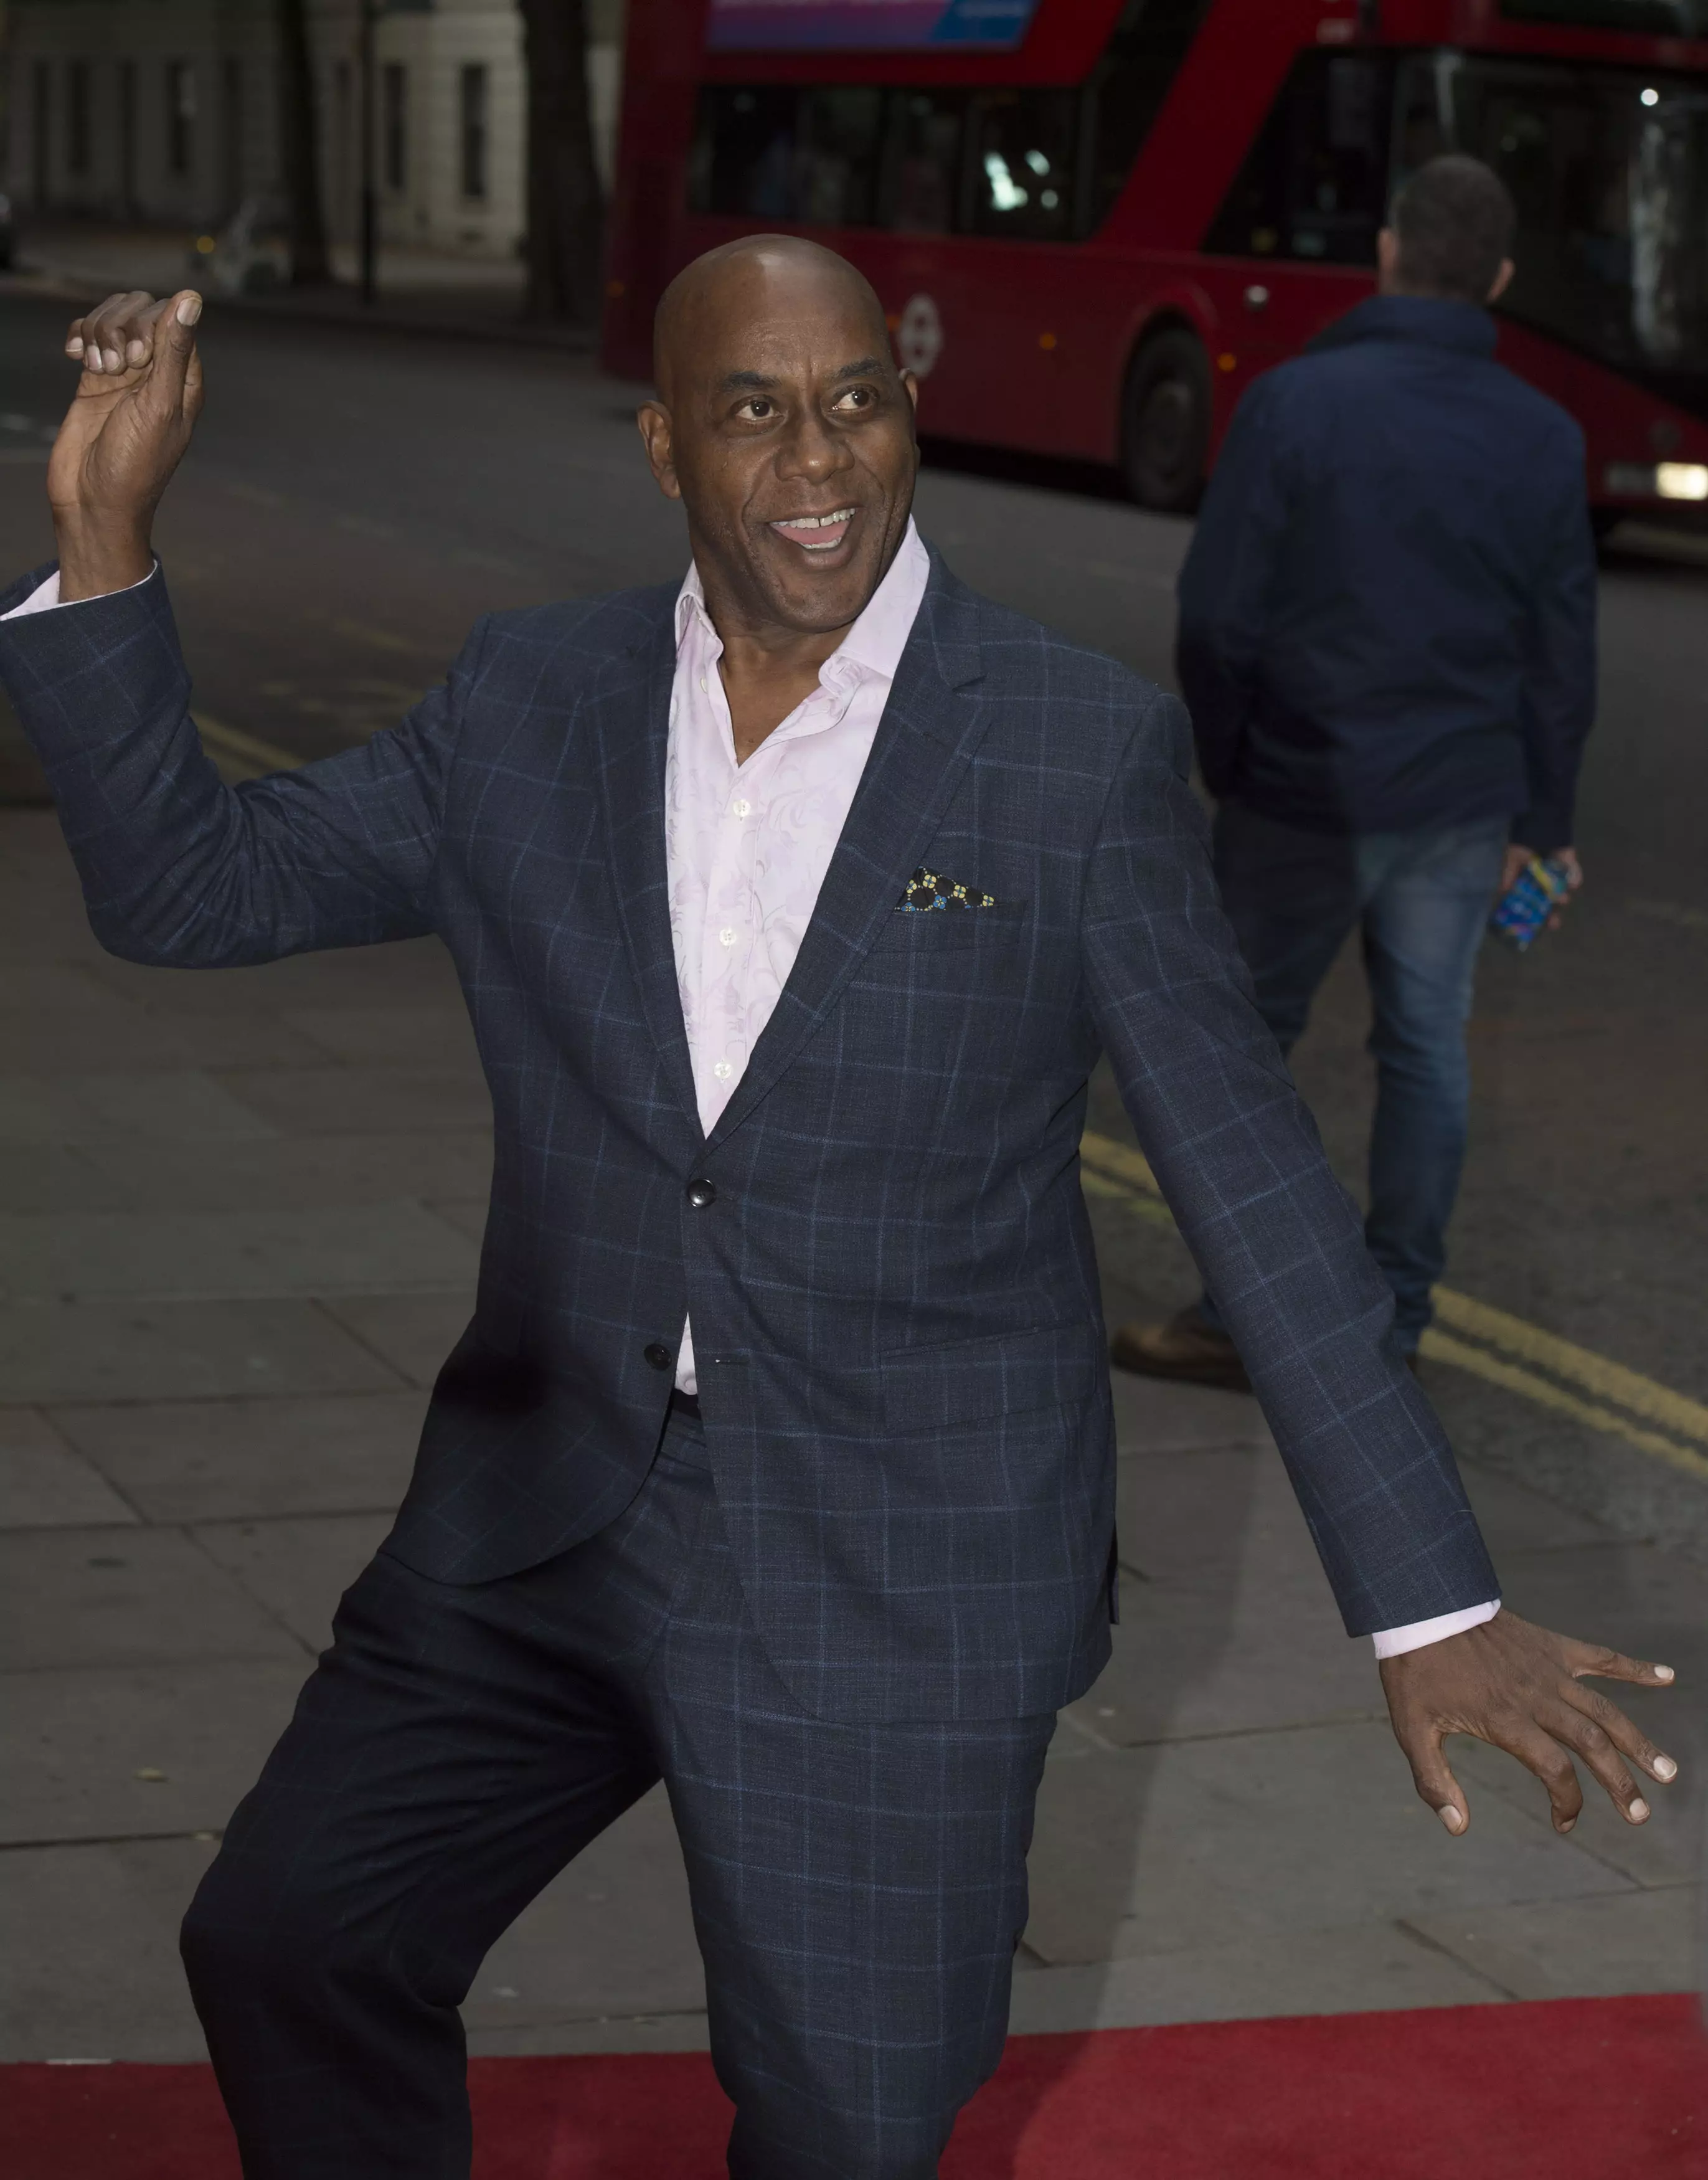 Ainsley Harriott is finally getting the respect he deserves.